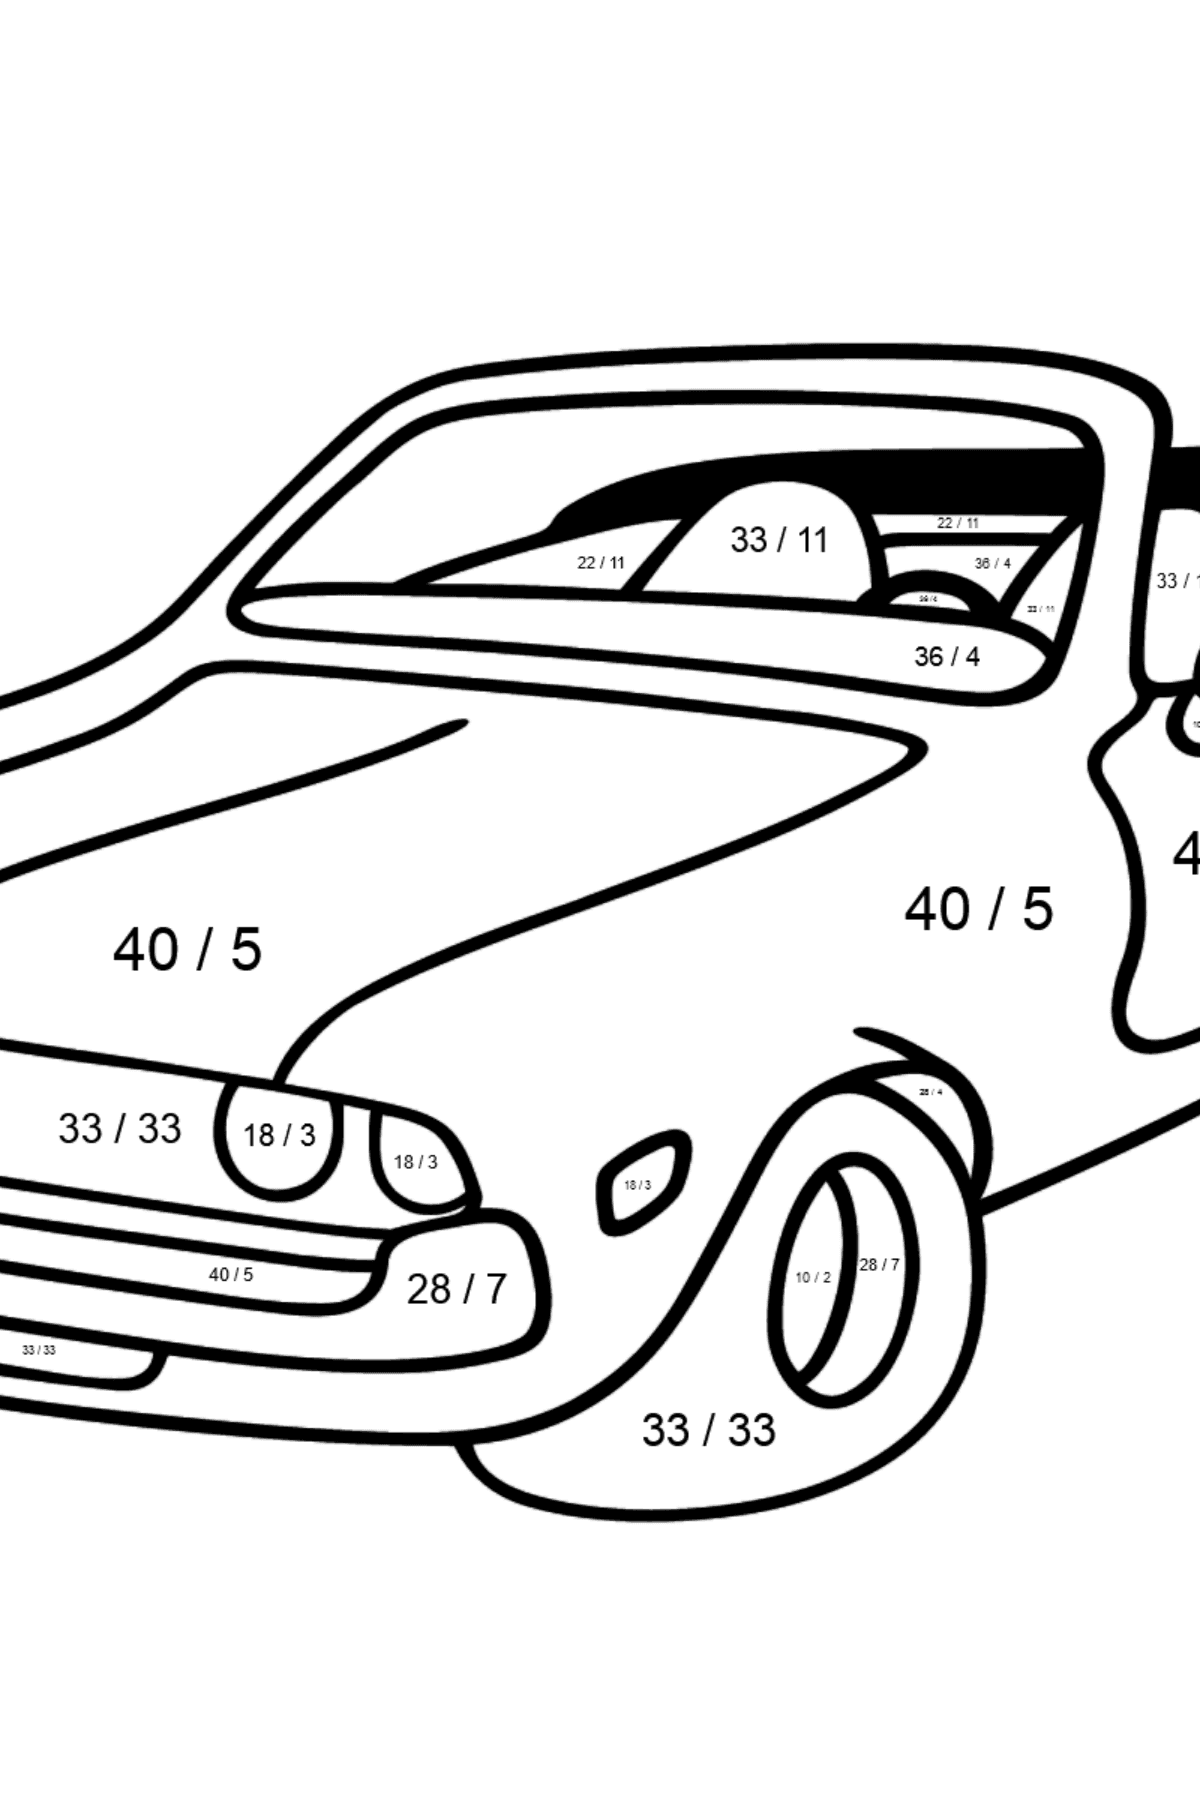 Open Top Cars coloring page - Math Coloring - Division for Kids